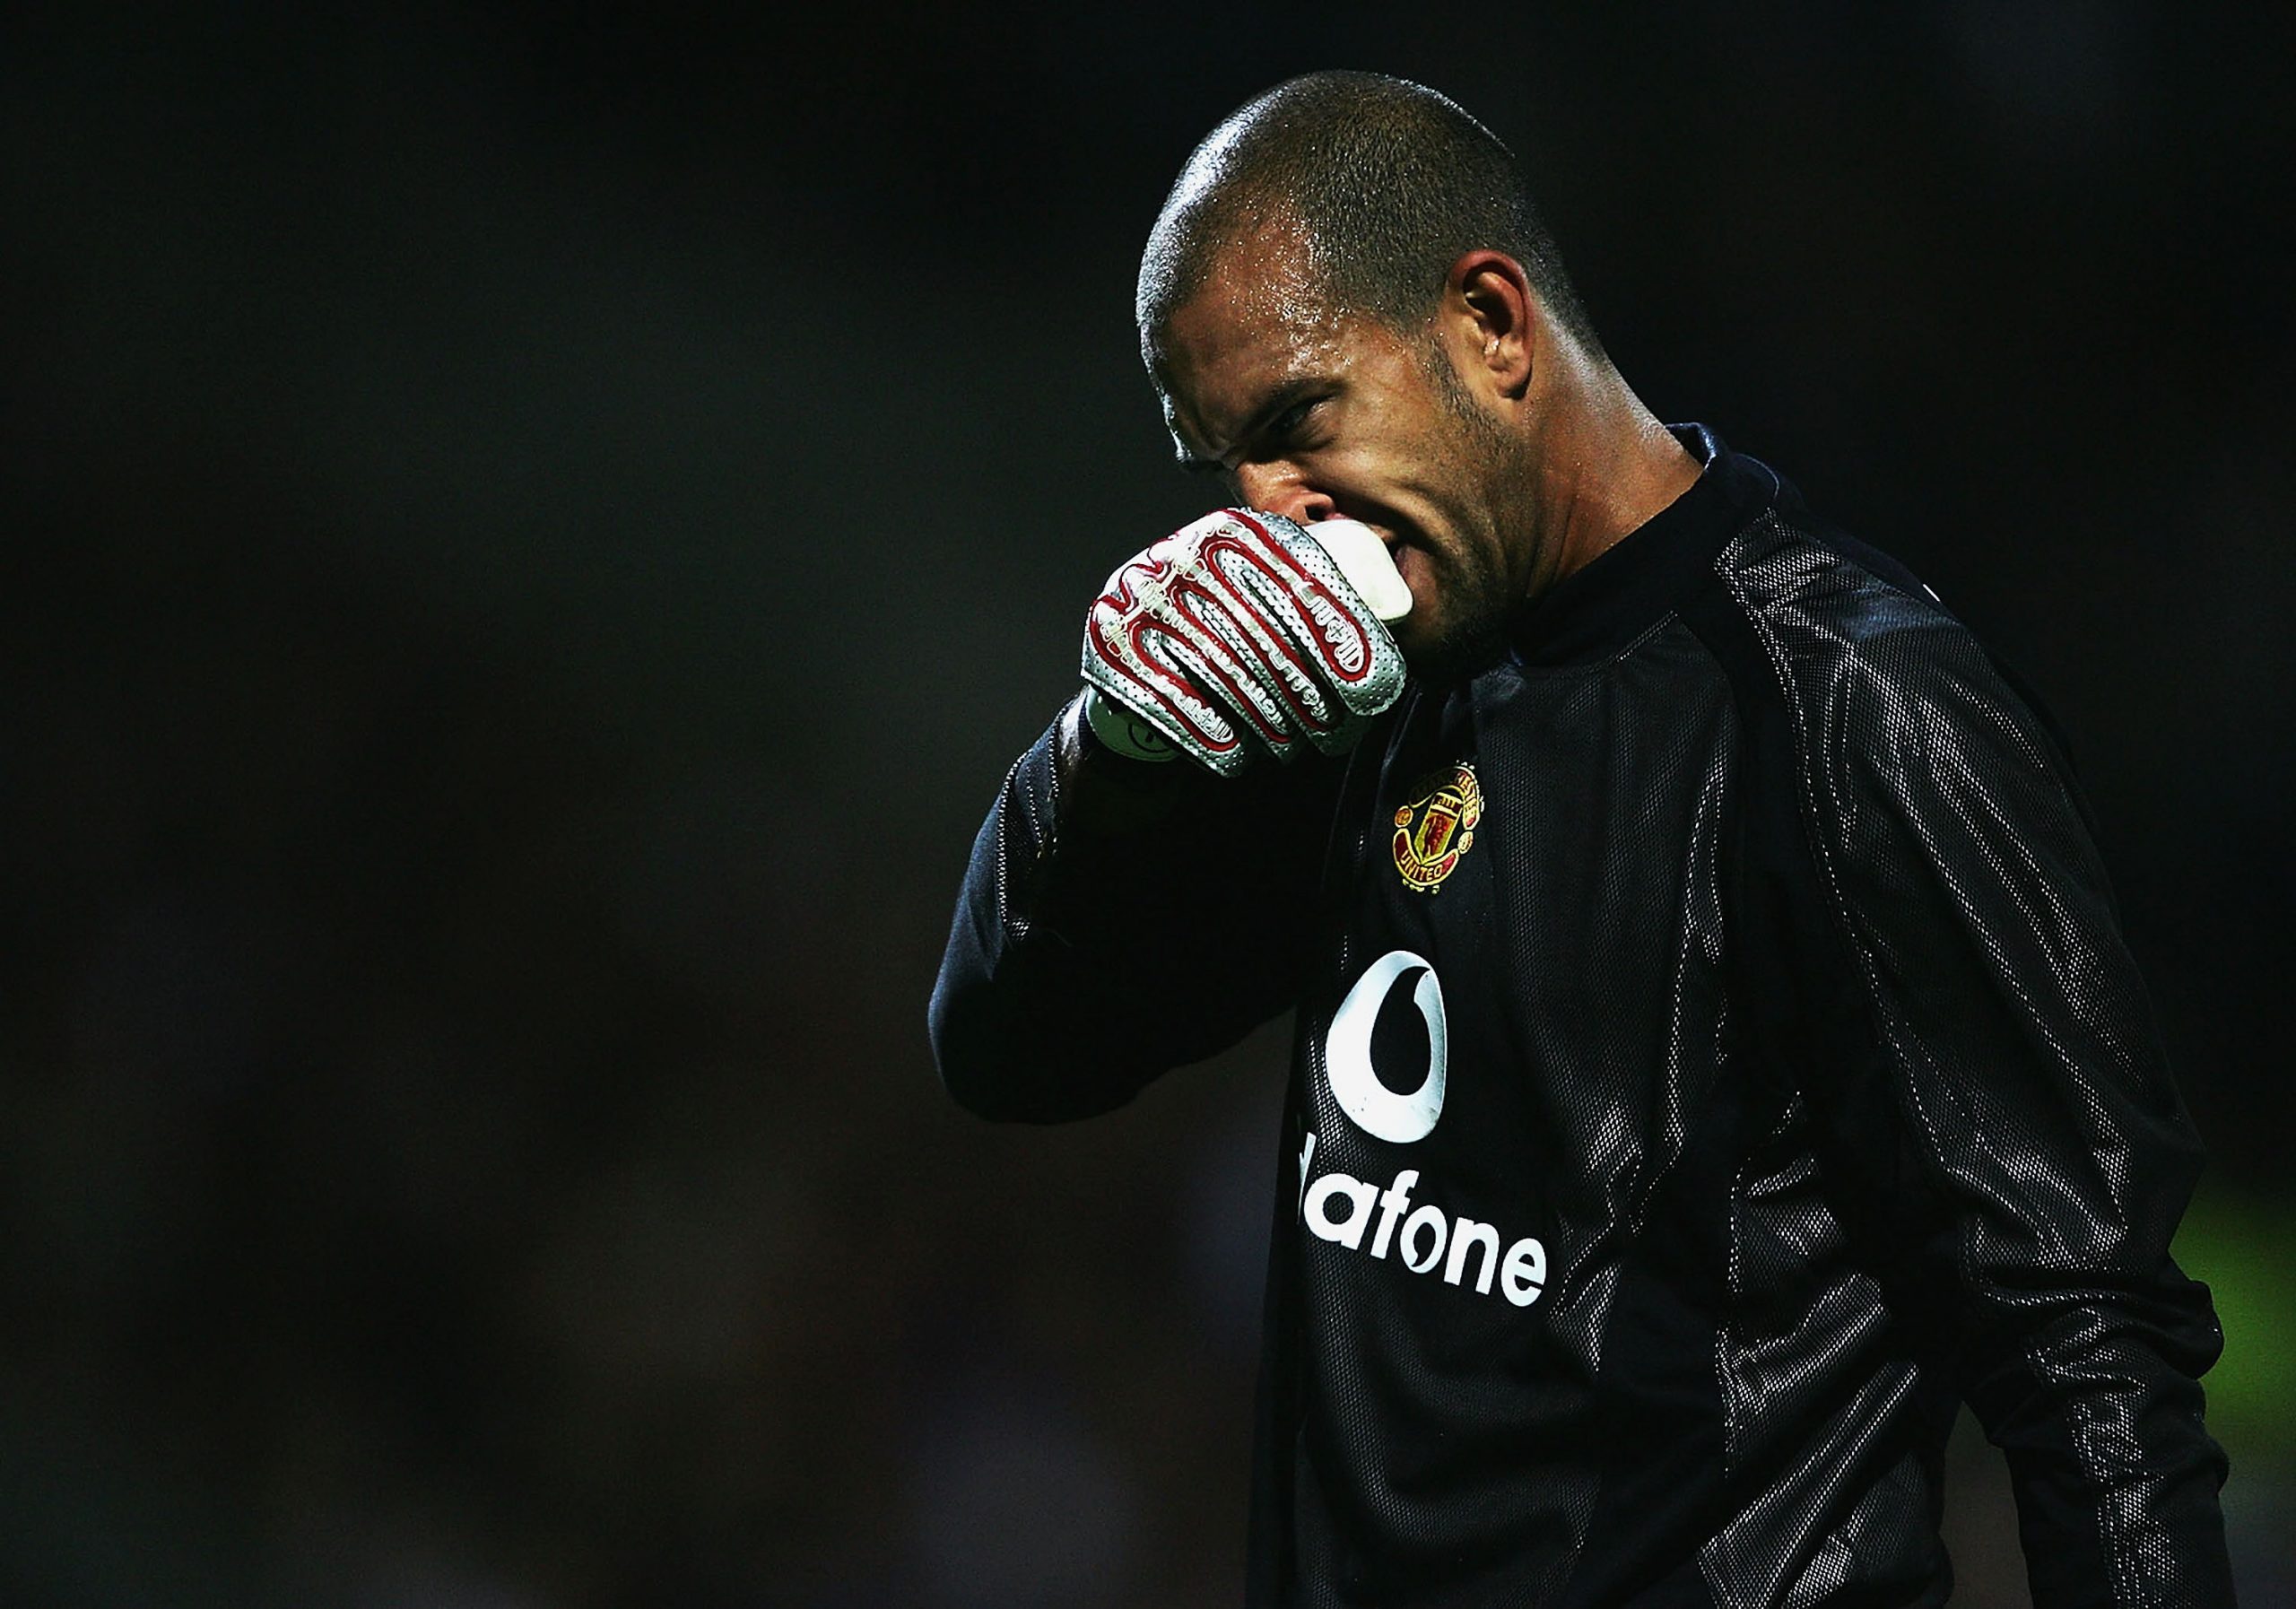 Tim Howard of Manchester United looks dejected during the UEFA Champions League Group D match between Olympique Lyonnais and Manchester United. (Photo by Shaun Botterill/Getty Images)